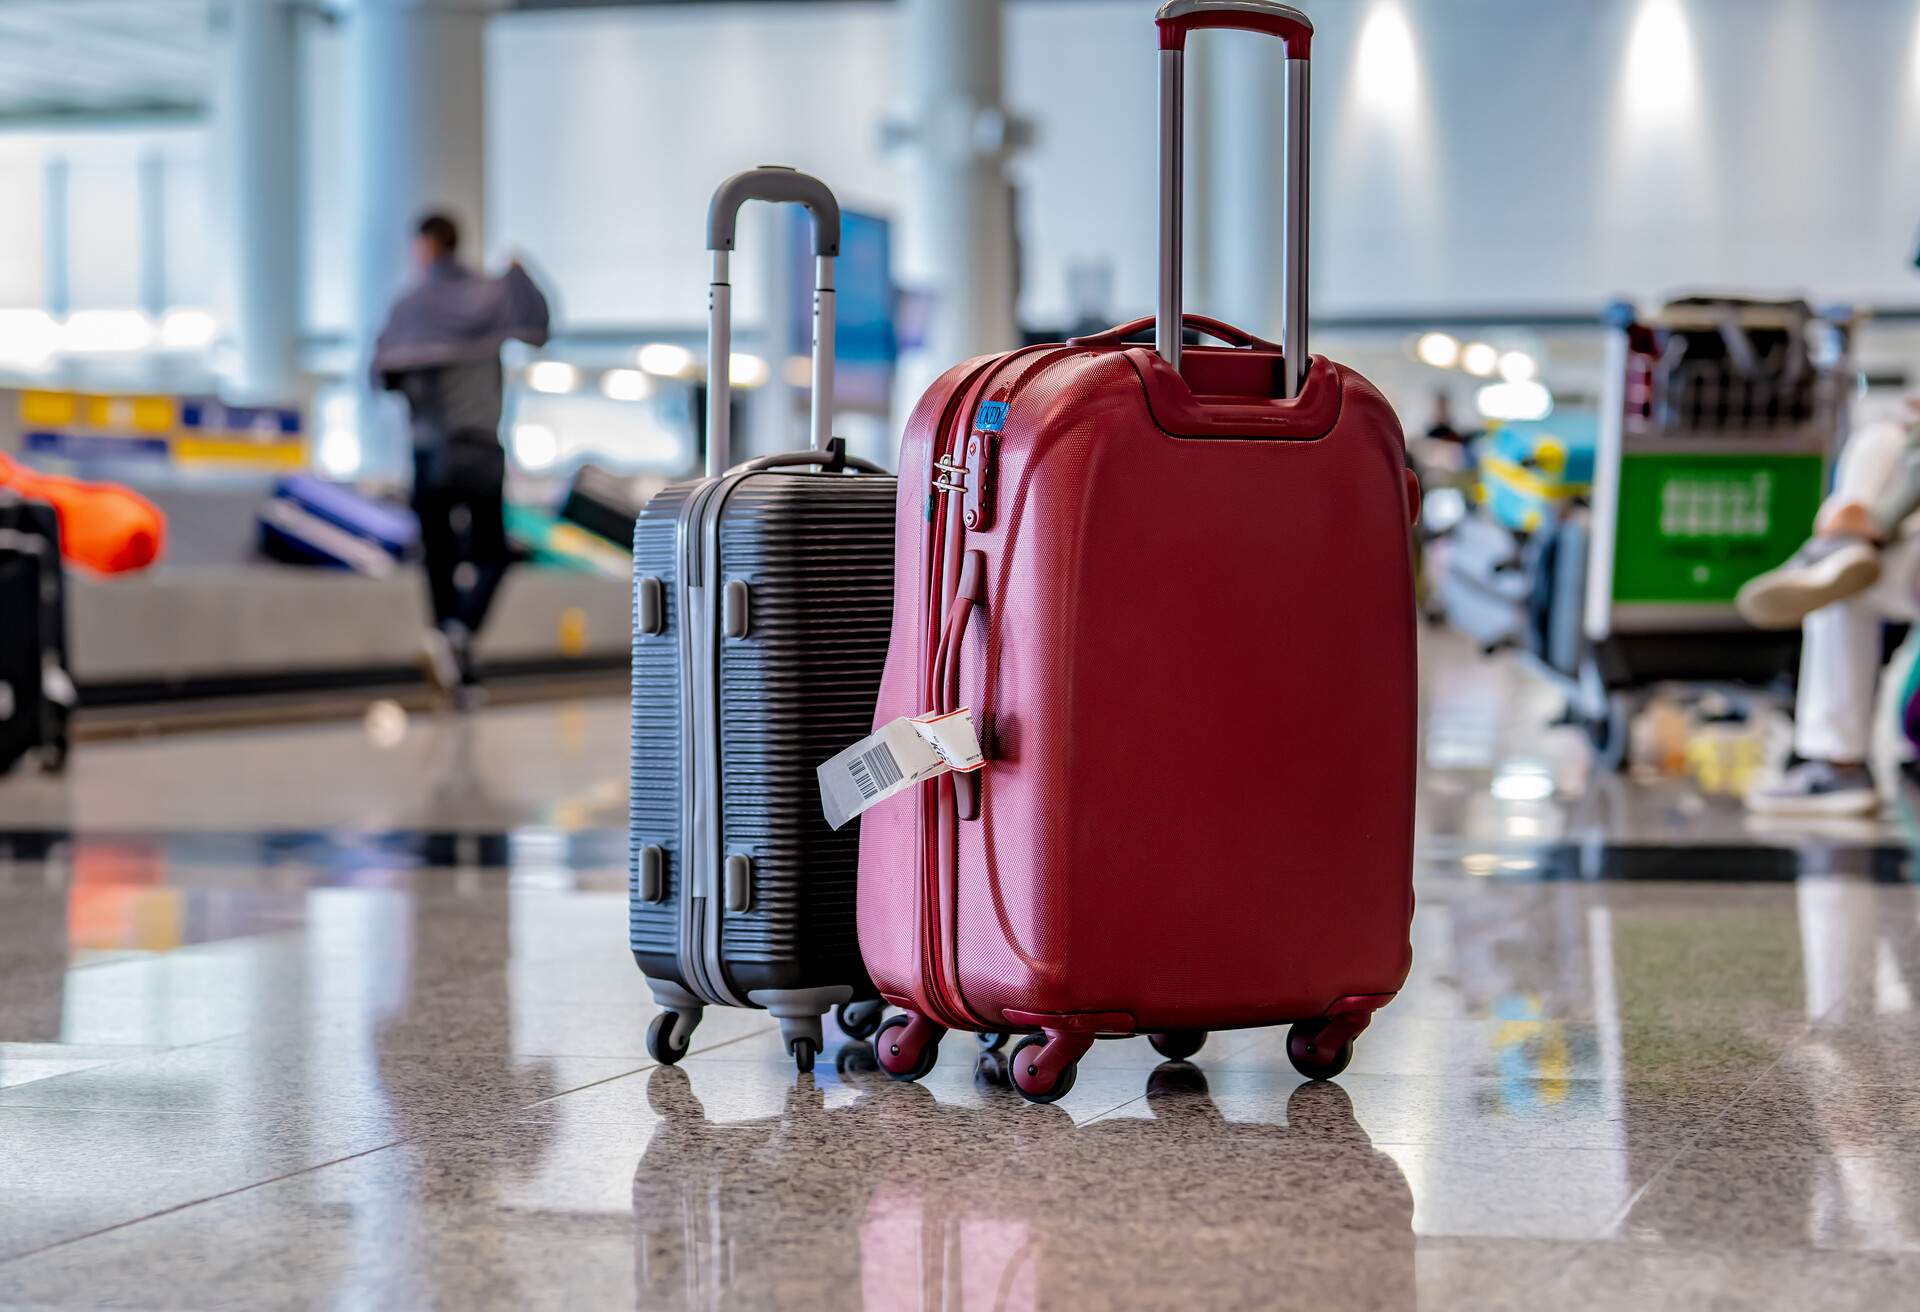 Luggage for travellers is neatly arranged on the pristine airport terminal floor.